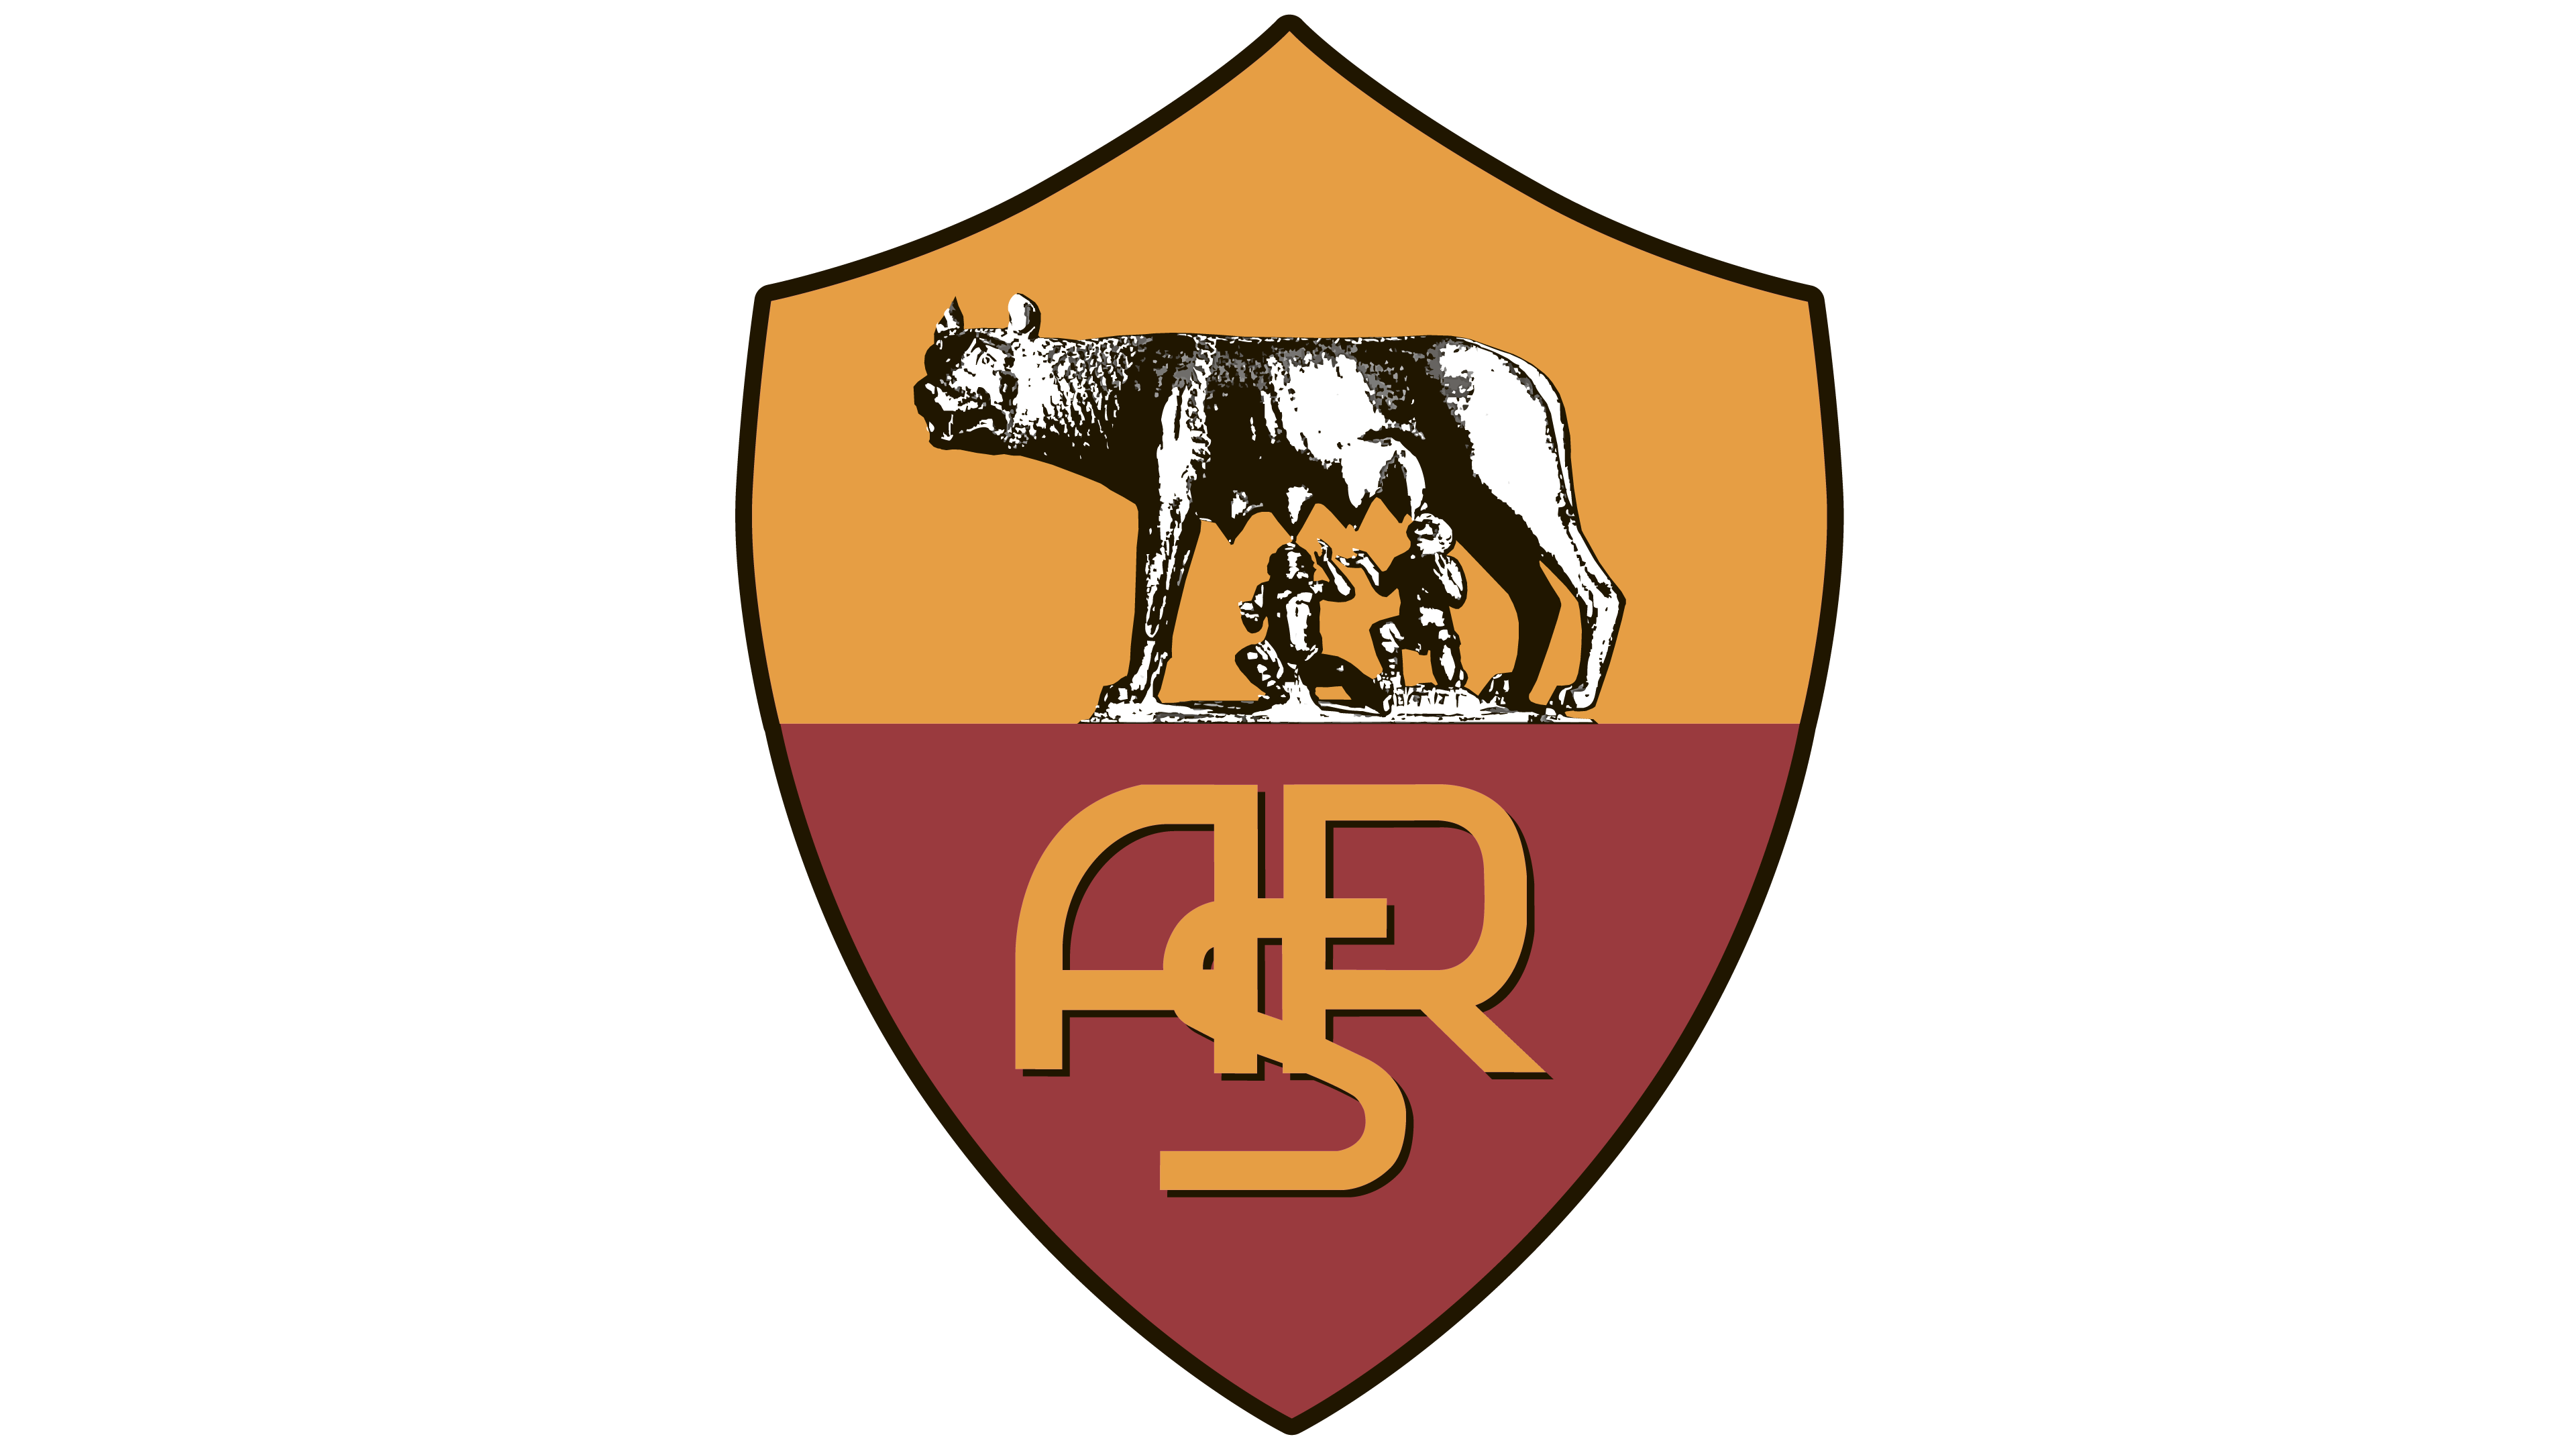 Yellow and Red Wolf Logo - Roma logo - Interesting History of the Team Name and emblem